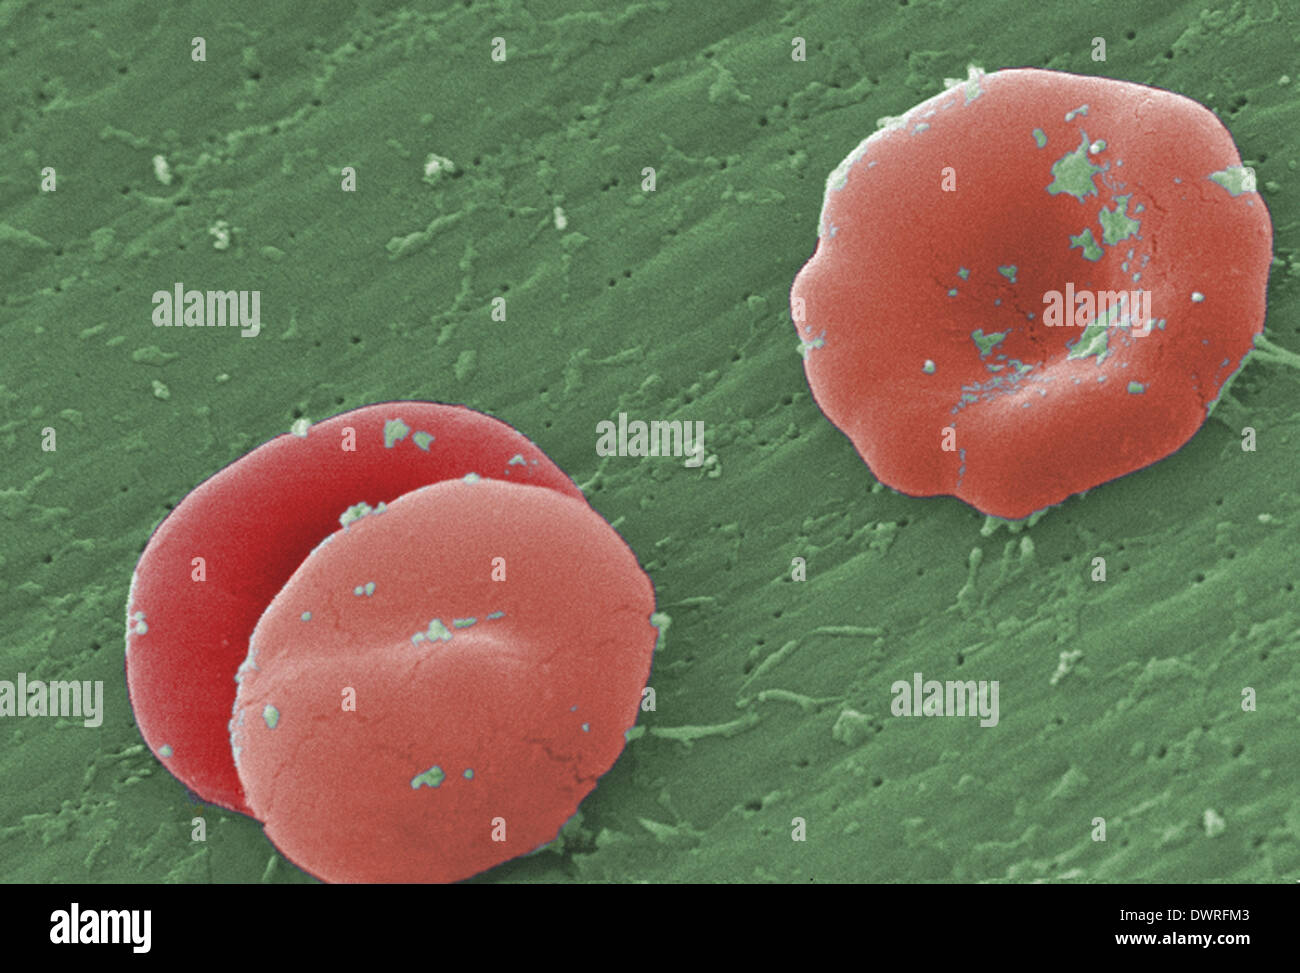 Sickle cell anemia sem Stock Photo